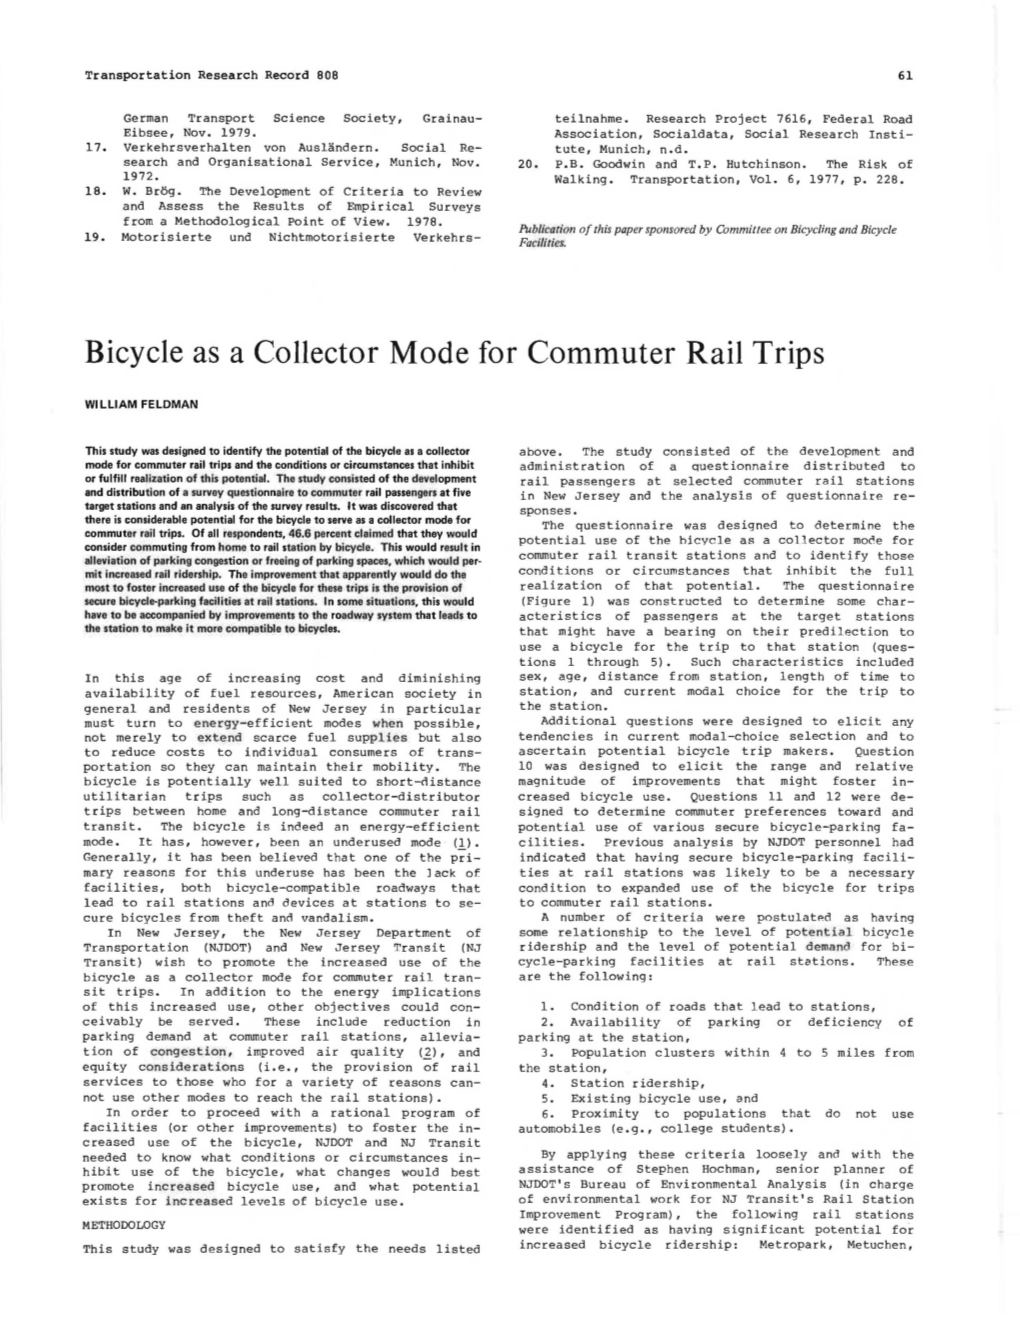 Bicycle As a Collector Mode for Commuter Rail Trips